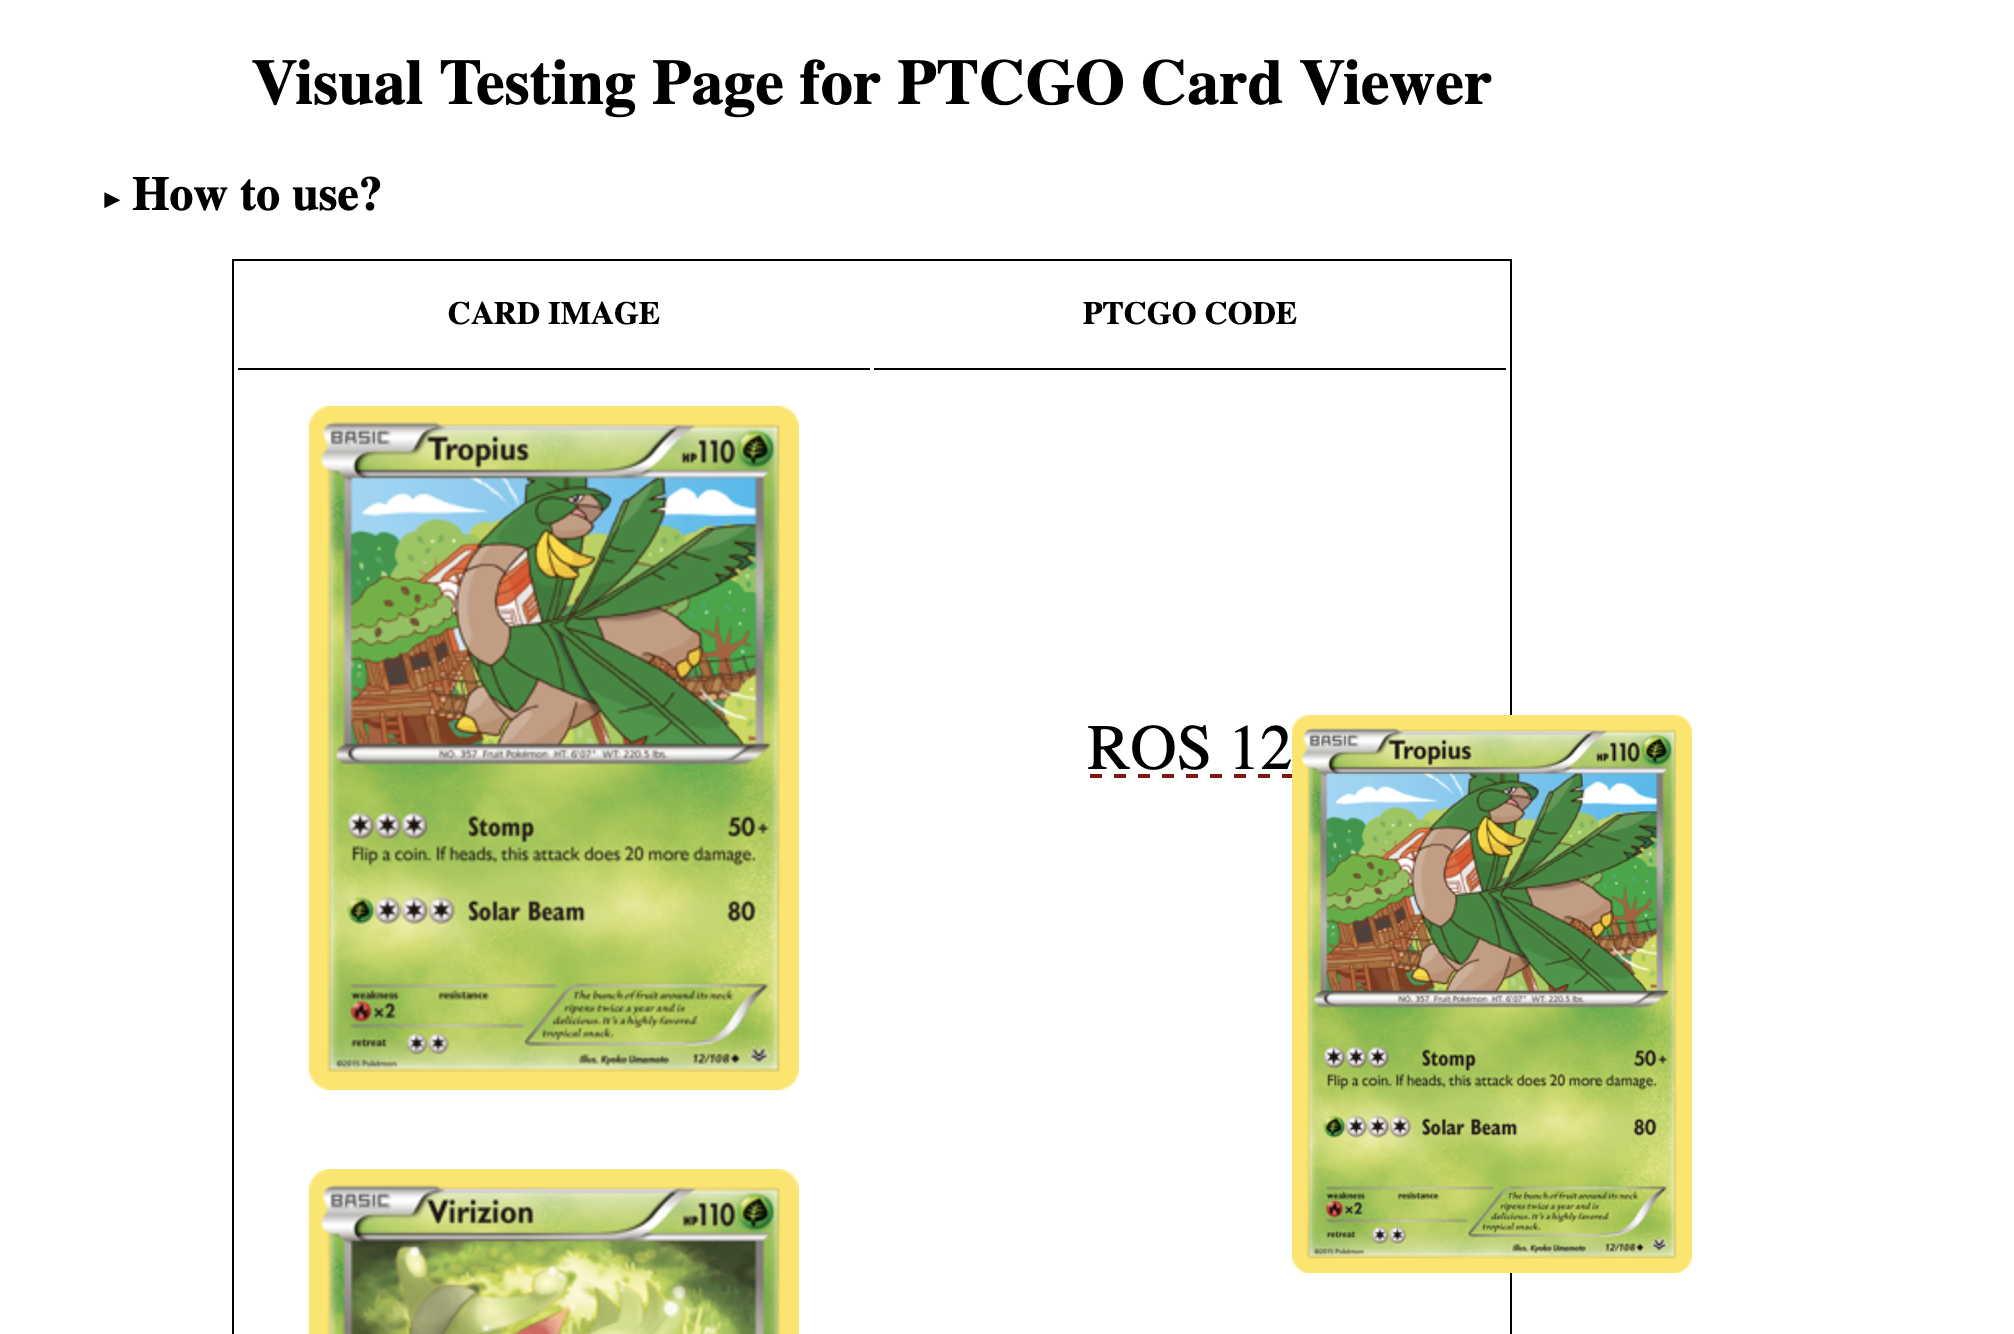 Screenshot of page with title "Visual Testing Page for PTCGO Card Viewer", a table with a Tropius card image and text ROS 12 underlined. Next to the text, a smaller version of the same image as before next to it.